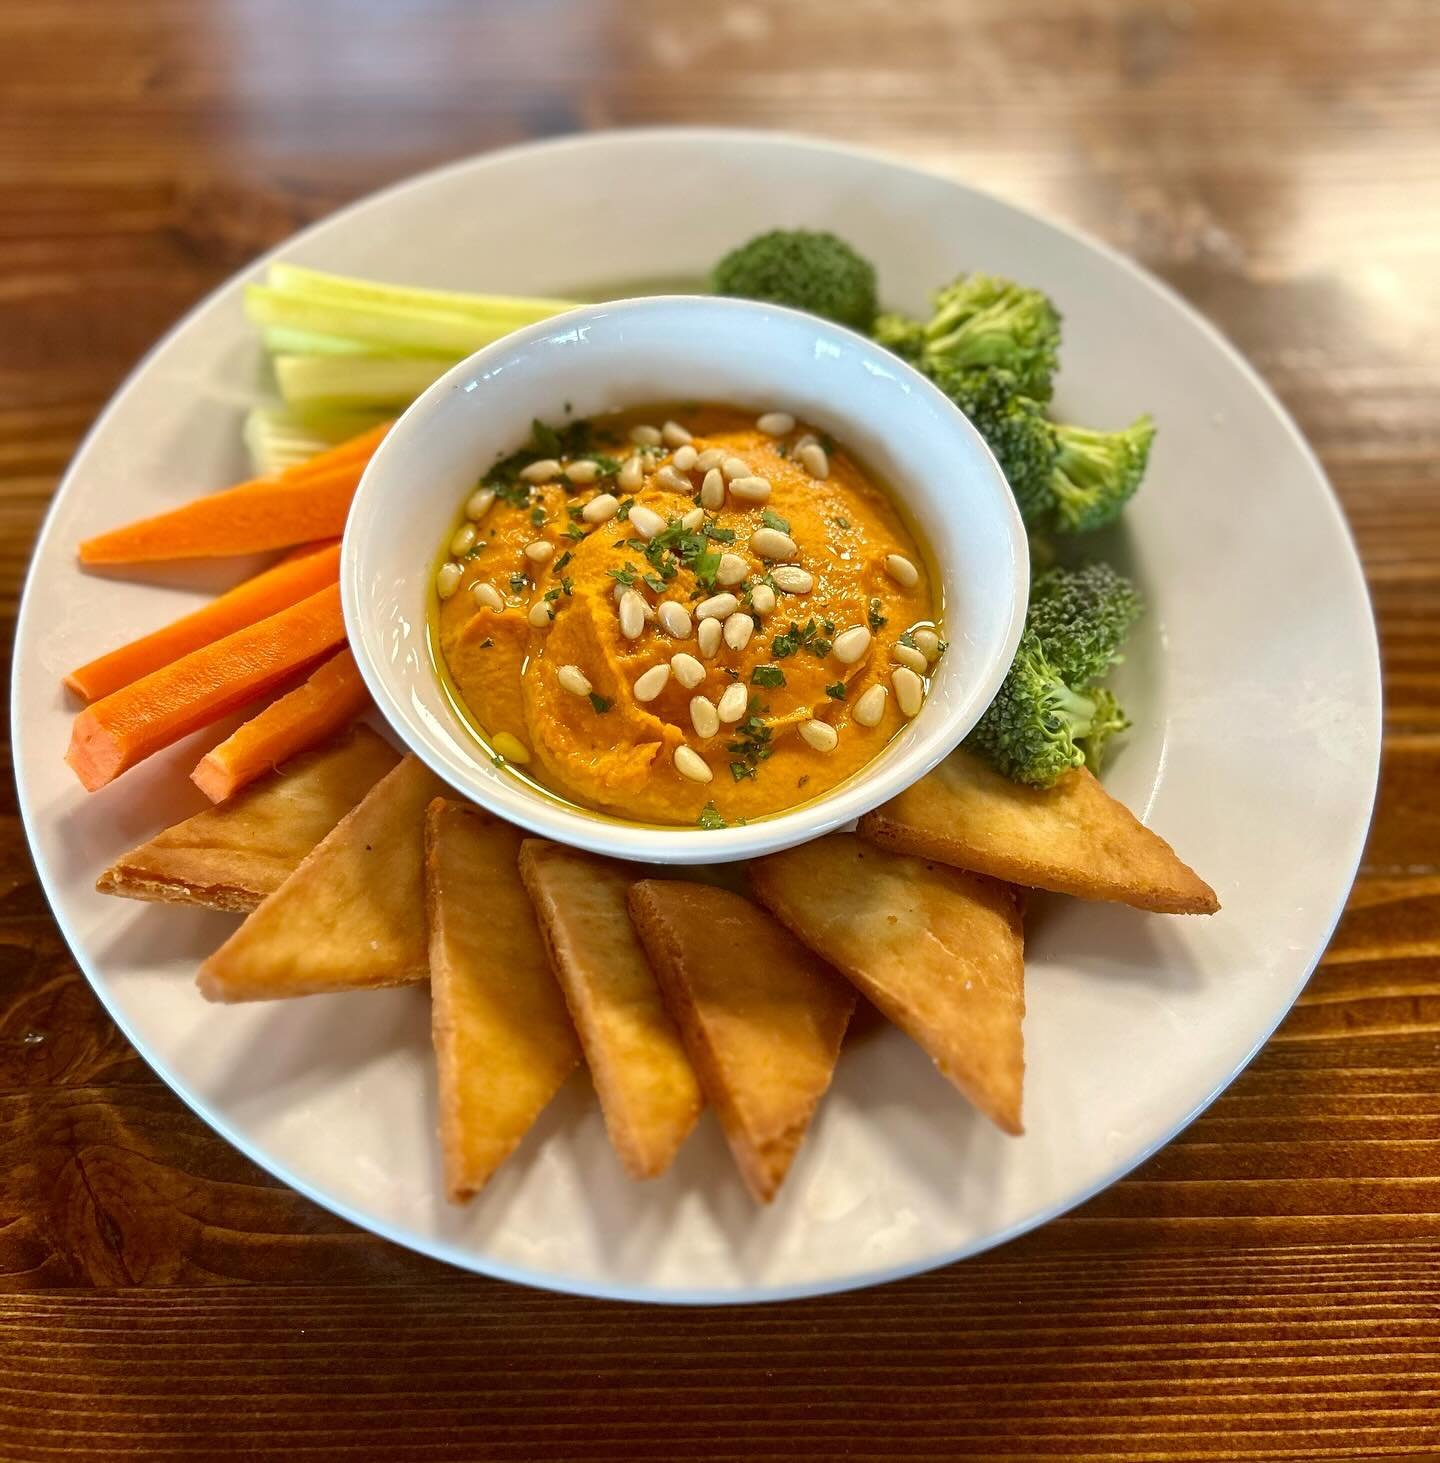 Littleton on Santa Fe Kitchen Special - Roasted red pepper hummus drizzled with garlic oil &amp; pine nuts, served with veggies &amp; fried pita!
Only available at our Littleton location at 5350 S Santa Fe Drive, Unit F, Littleton CO 80120.